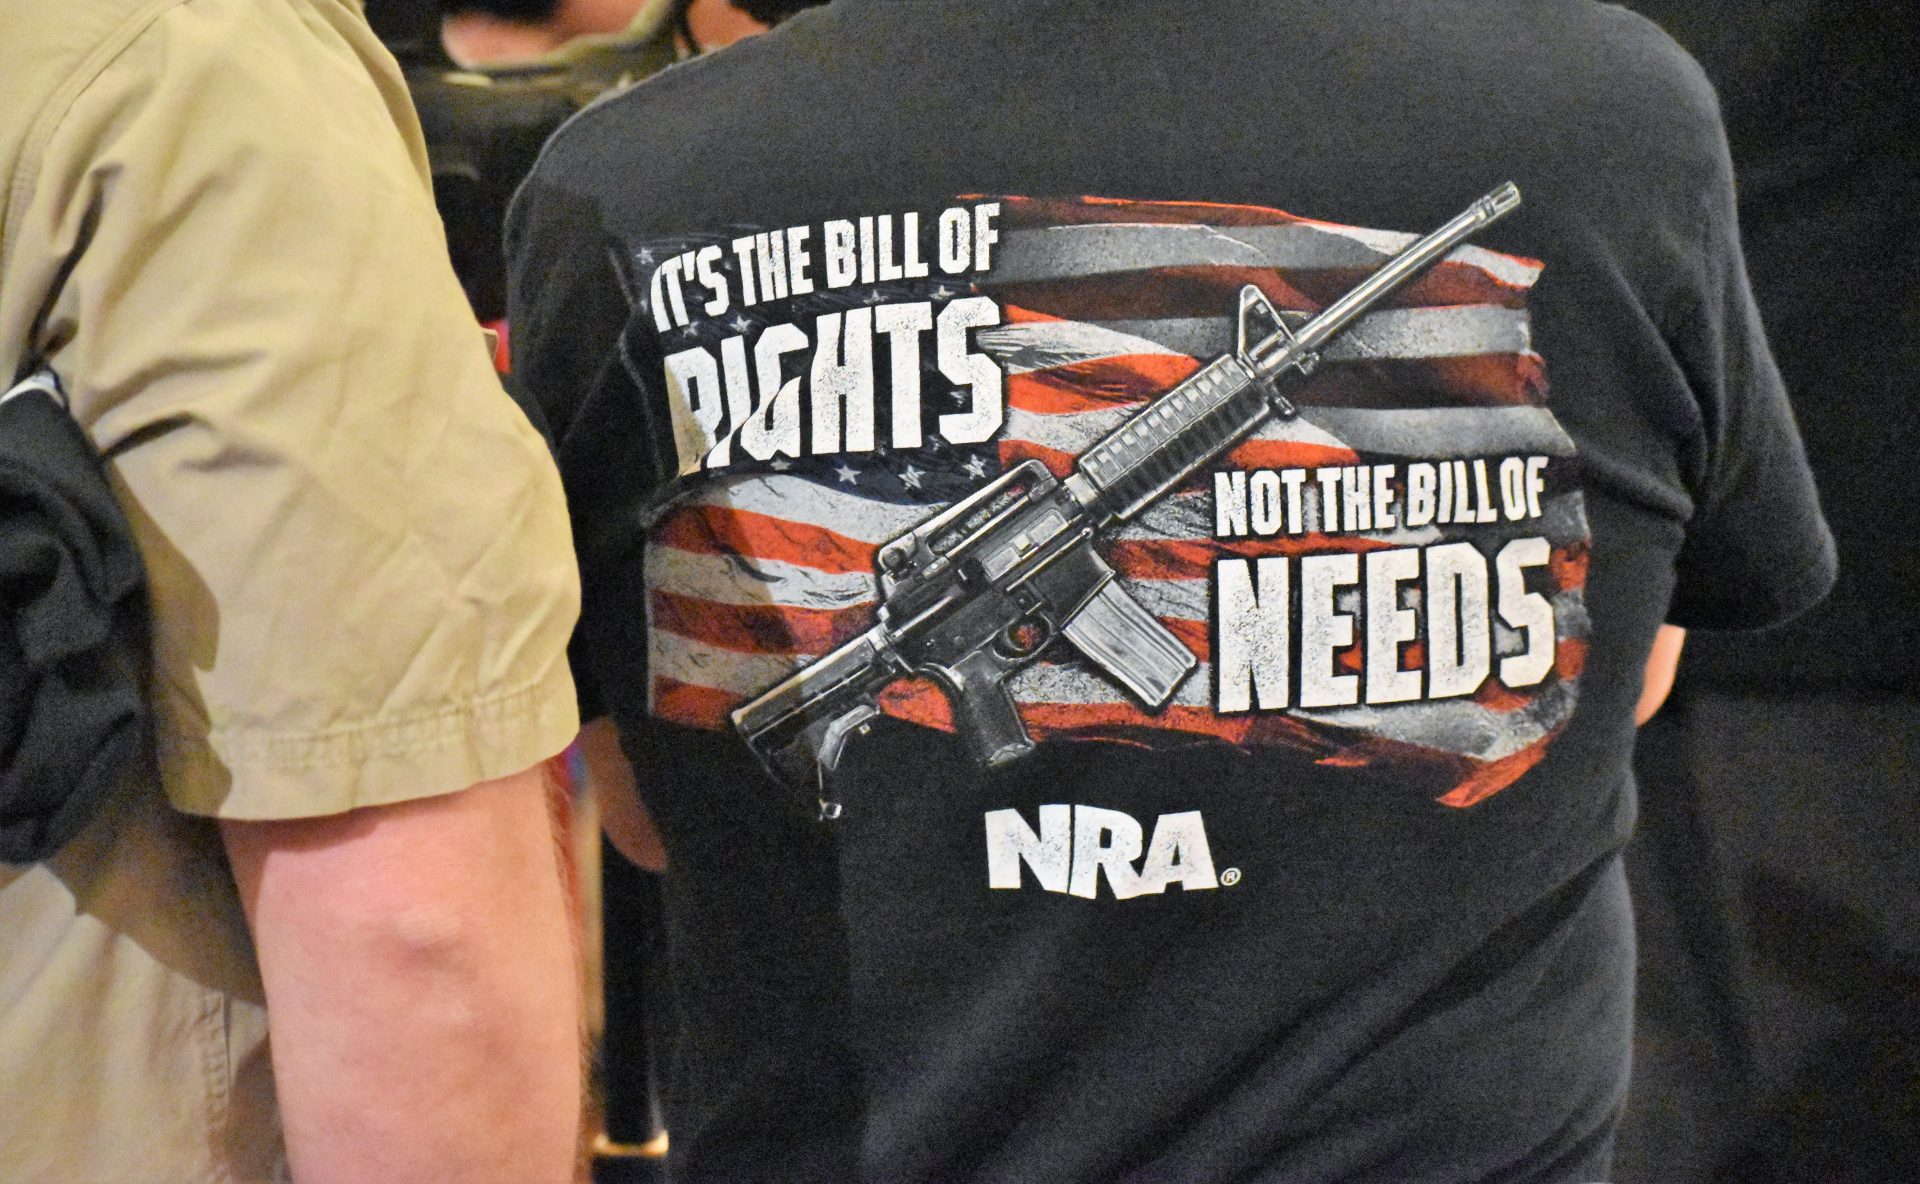 A demonstrator wears a shirt that says, "It's The Bill of Rights / Not The Bill of Needs" during a rally on May 6, 2019, in the state Capitol in Harrisburg.